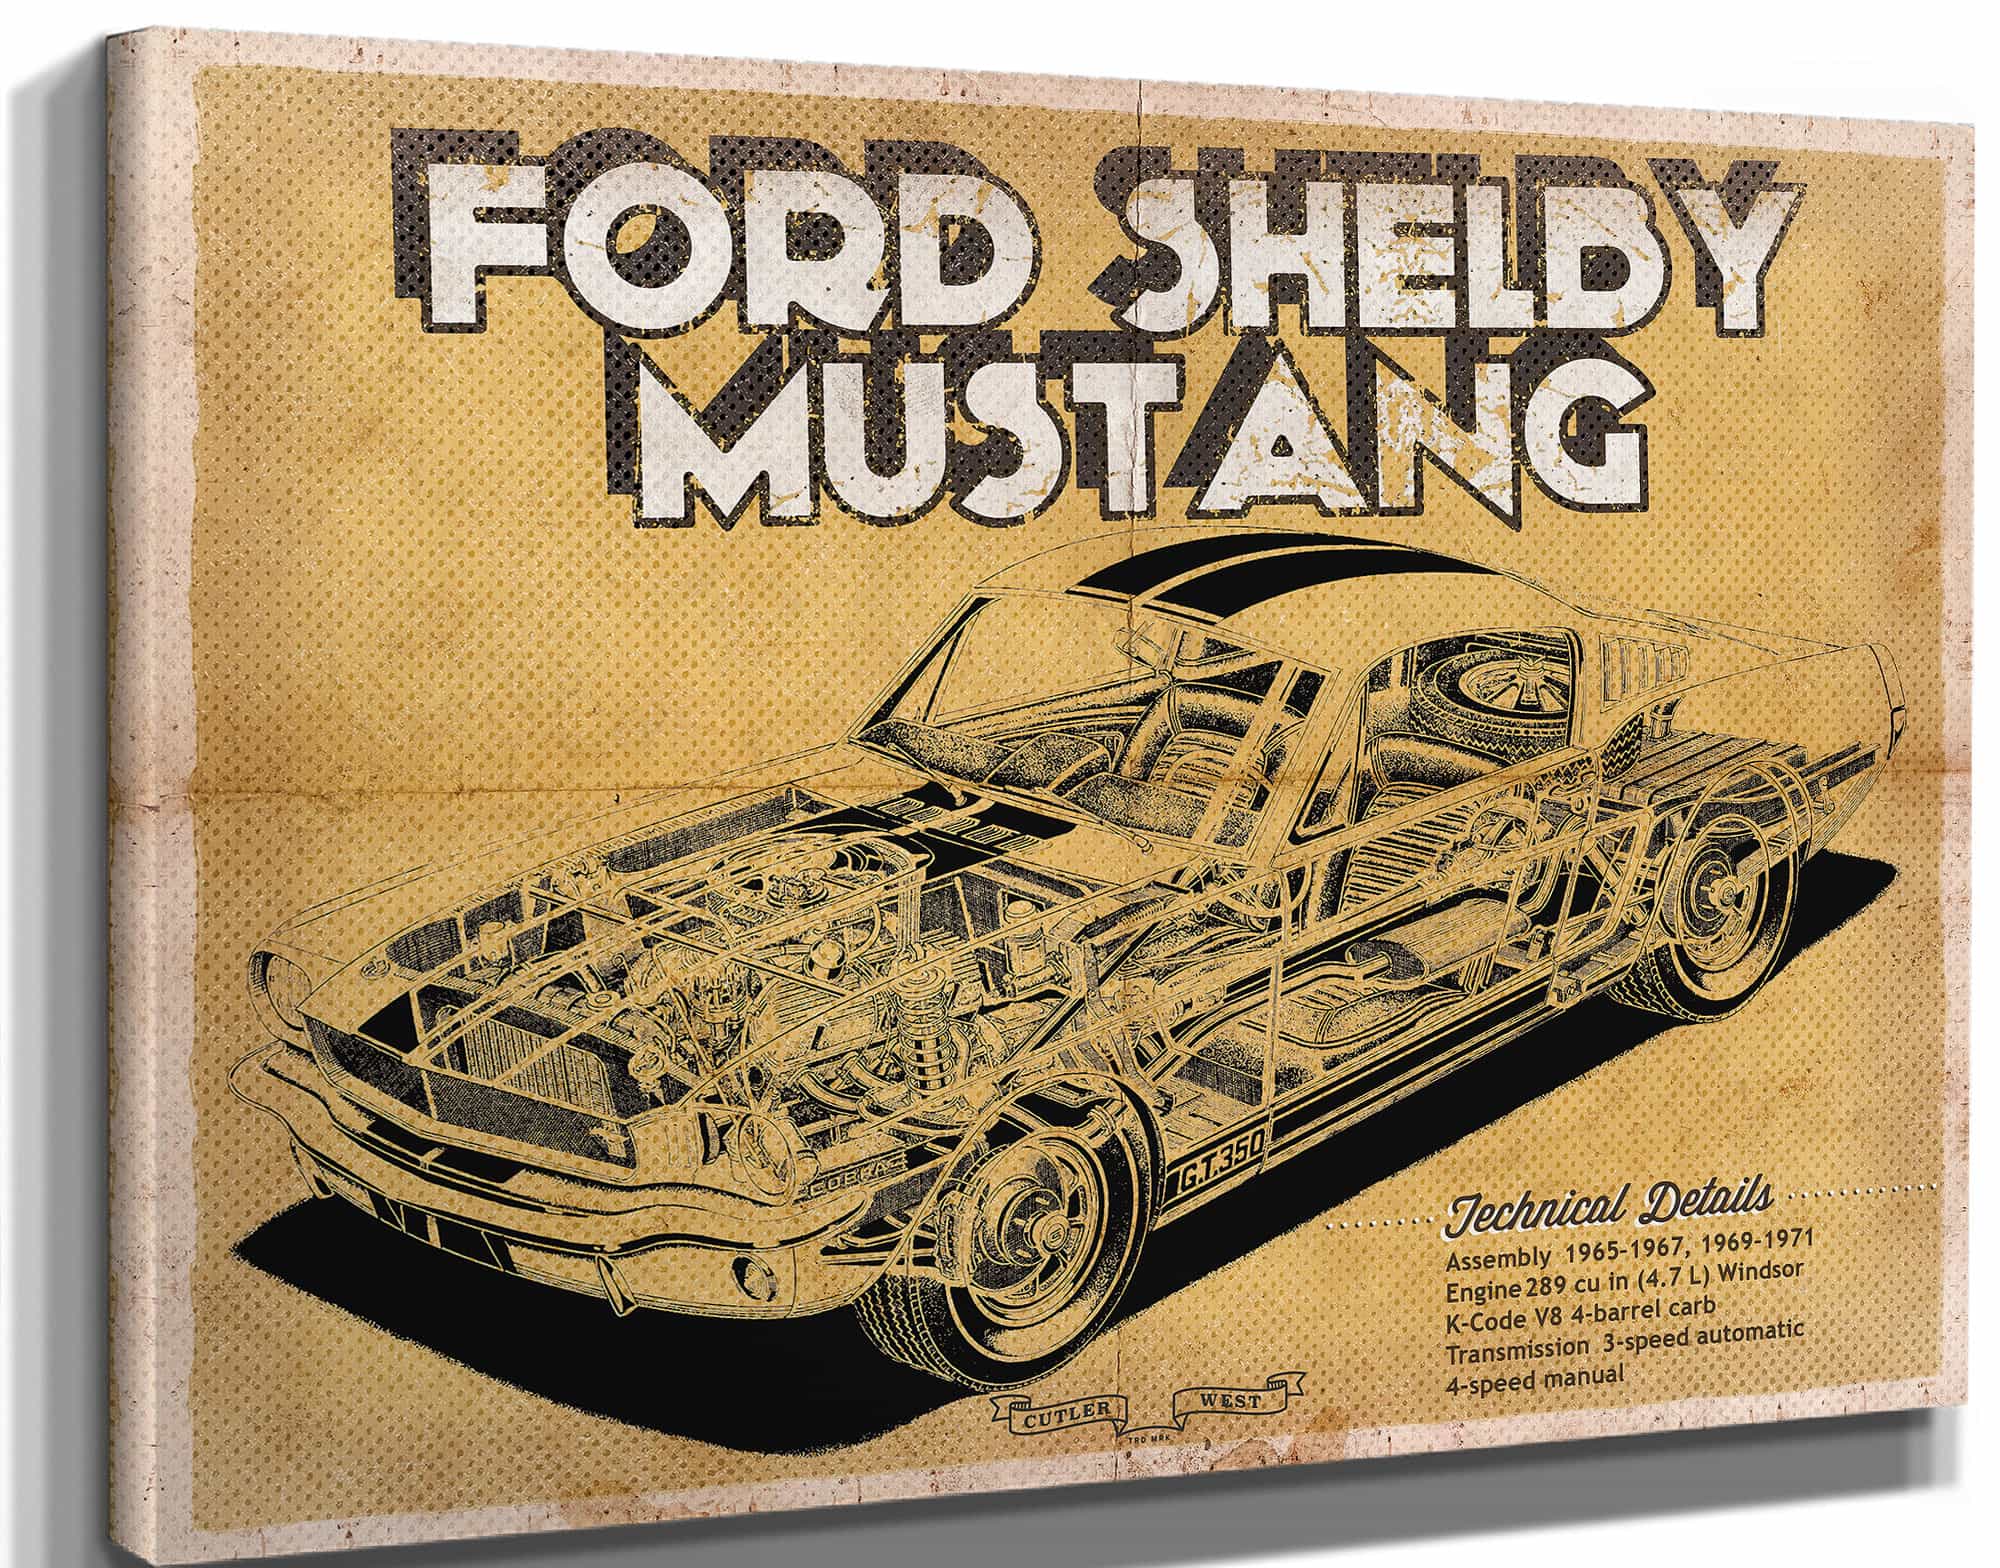 Vintage Ford Shelby Mustang Sports Car Print